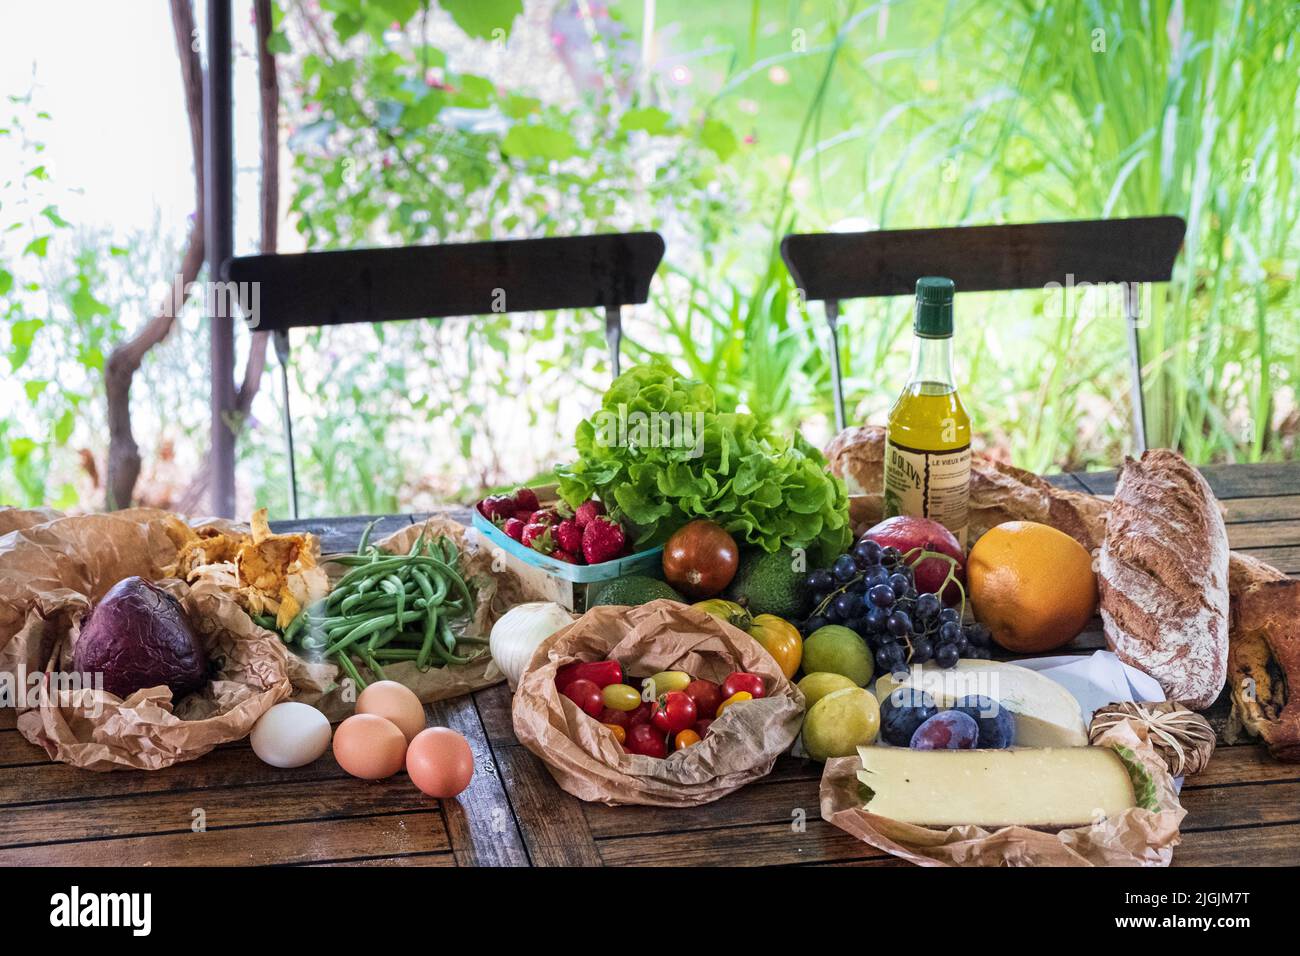 Produce from weekly market in Provence, Vaison-la-Romaine, France Stock Photo